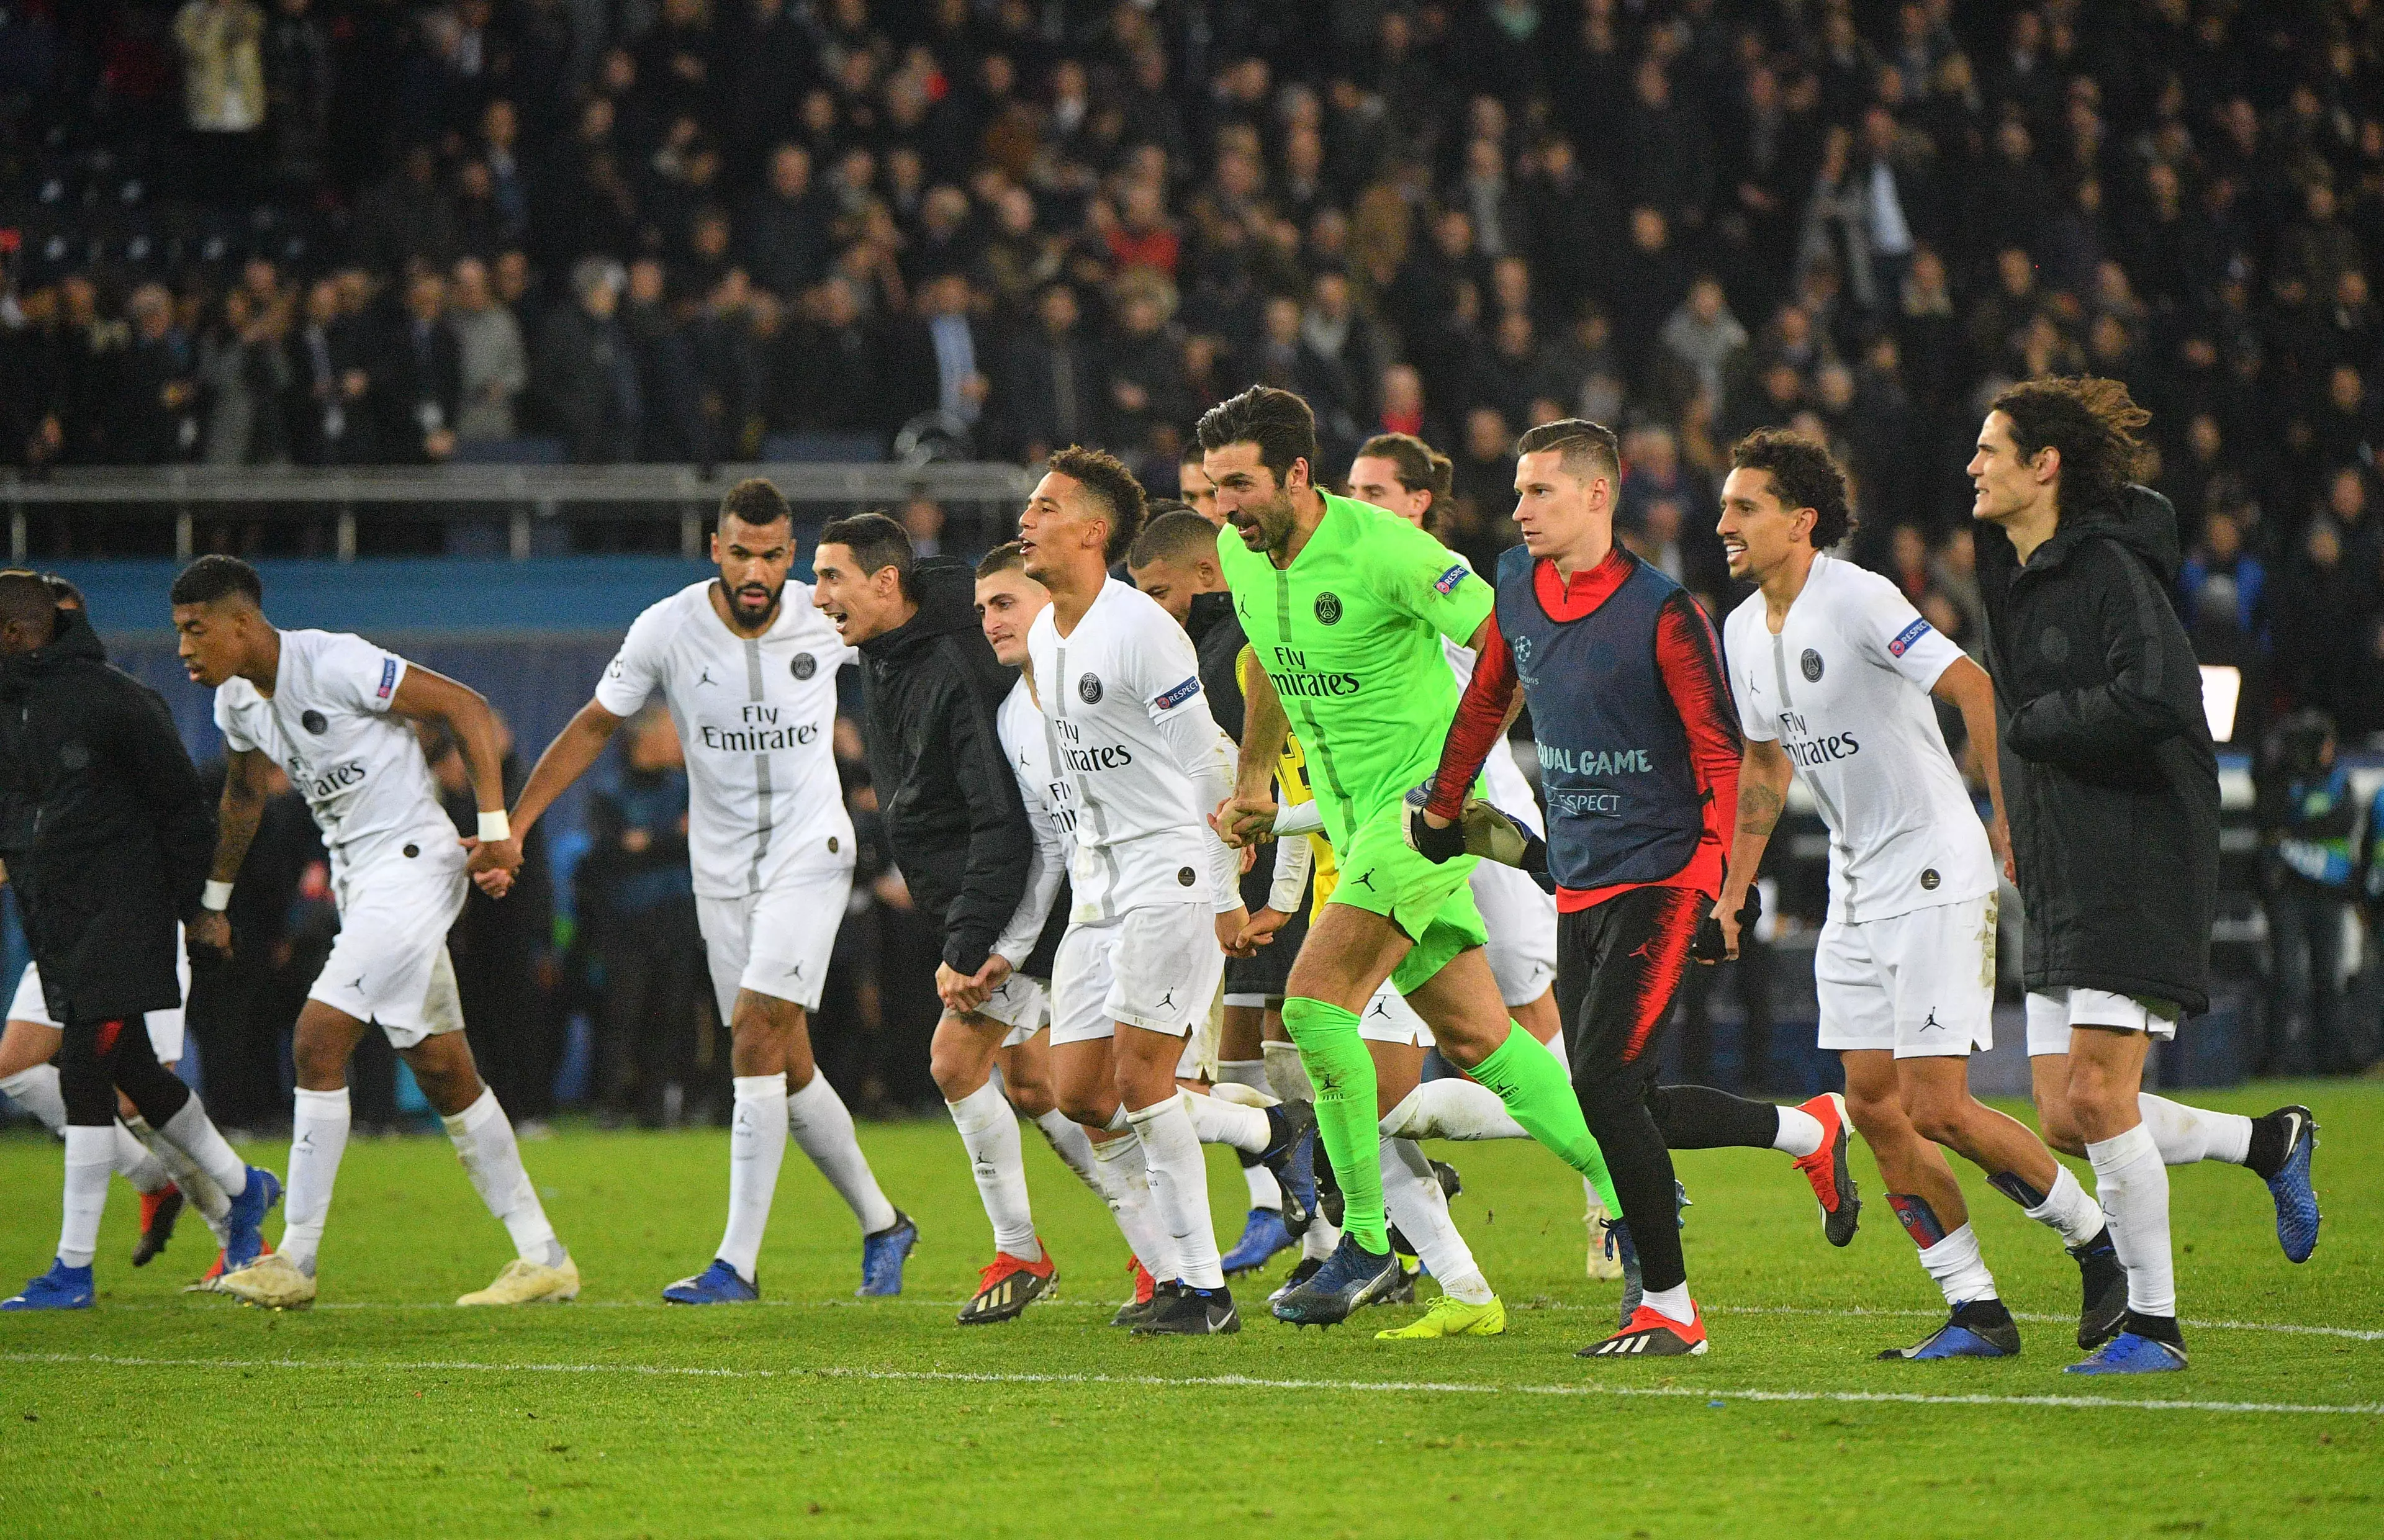 PSG players celebrate the win over Liverpool. Image: PA Images